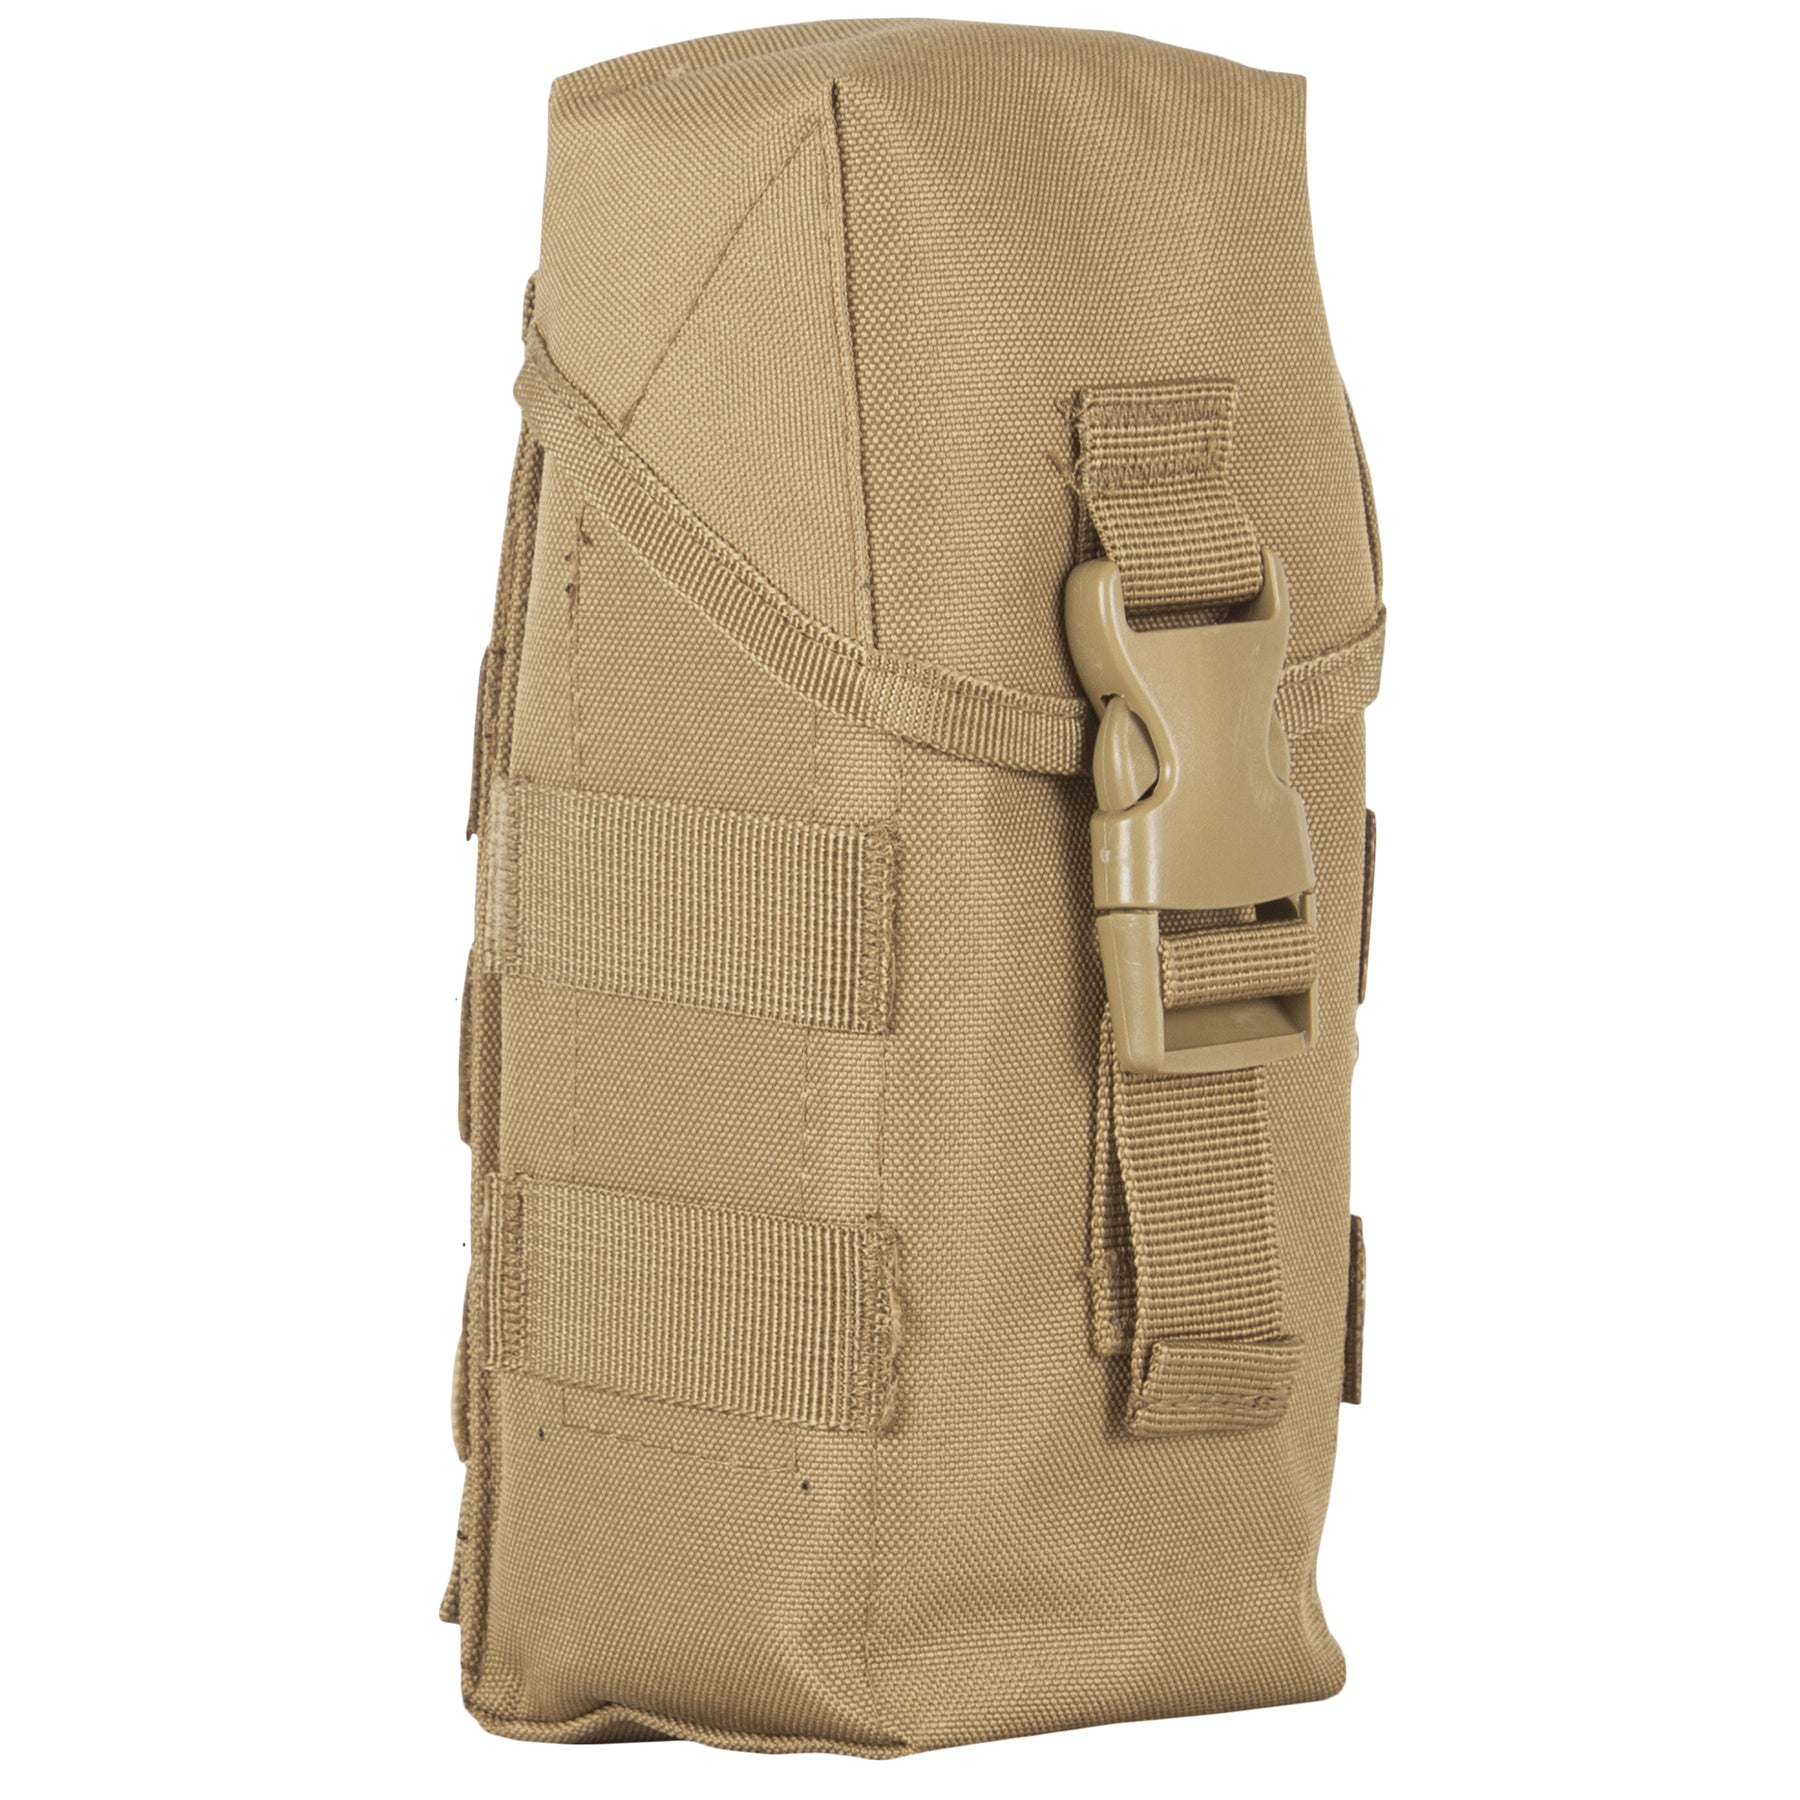 Quarter angle of Triple M16 Ammo Pouch. 